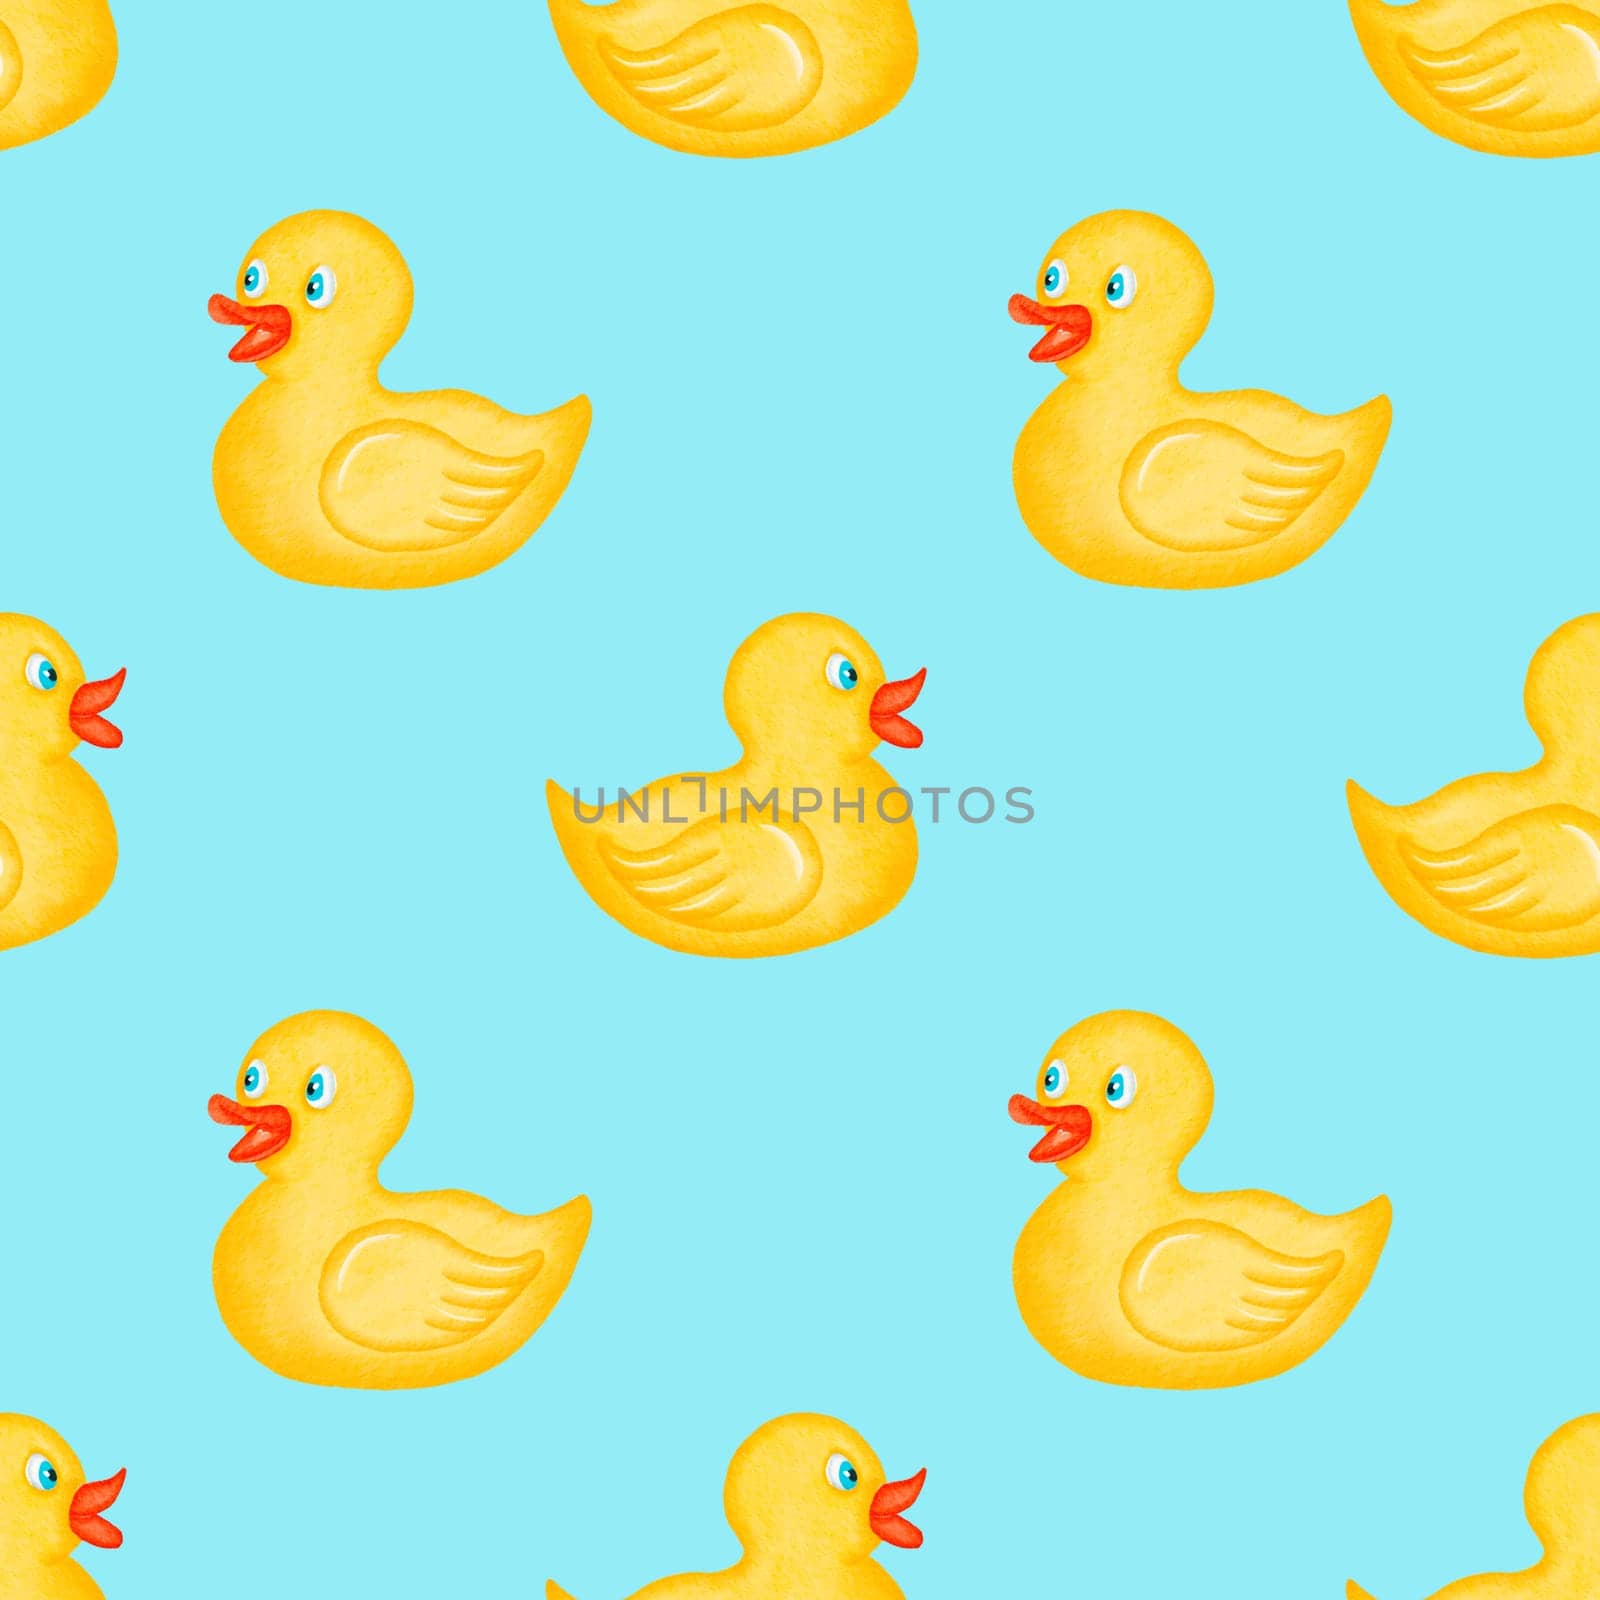 Watercolor seamless pattern. Yellow duck pattern. Toys. Bath duck background. Design for kids, children, textile, fabric, home decor. Rubber ducks for bath. Painted ornament.